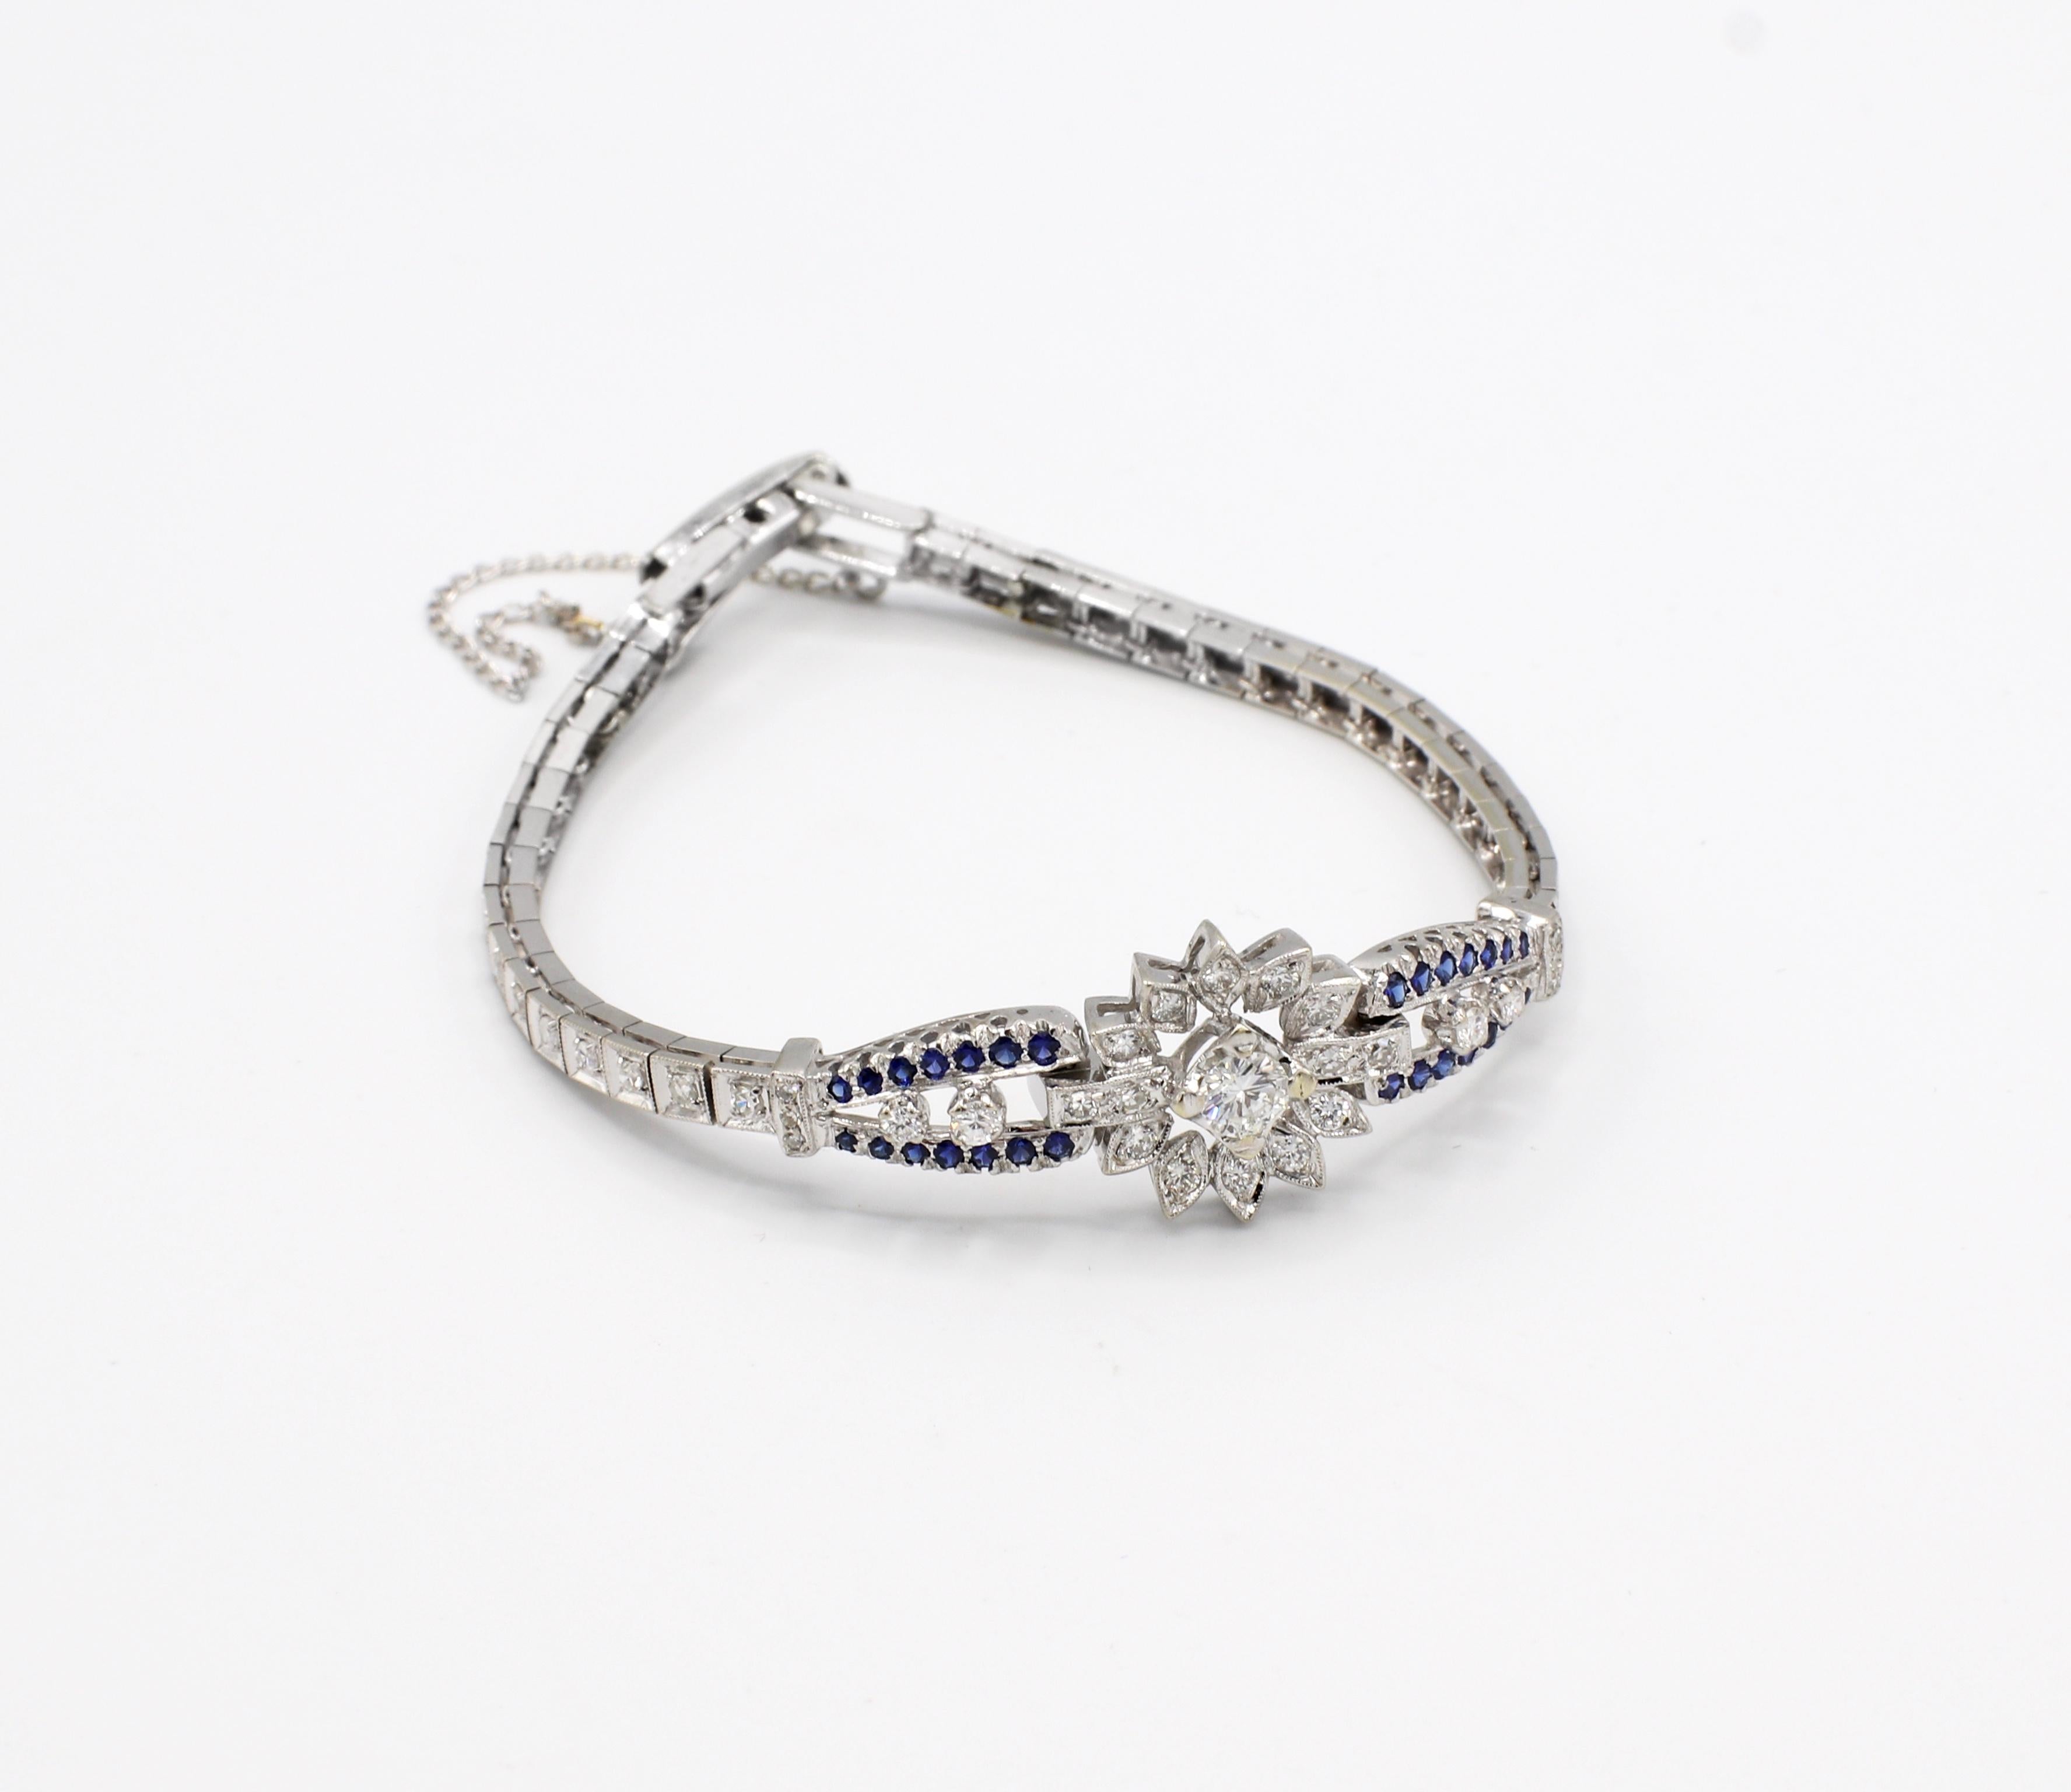 Vintage 14 Karat White Gold 1.50 Carat Diamond & Blue Sapphire Bracelet 

Metal: 14k white gold
Weight: 11.78 grams
Diamonds: Approx. 1.50 carats G VS, center diamond is approx. .30 carats 
Length: 6.75 inches 
Width: 5.2mm- 3.3mm 
Safety chain 
